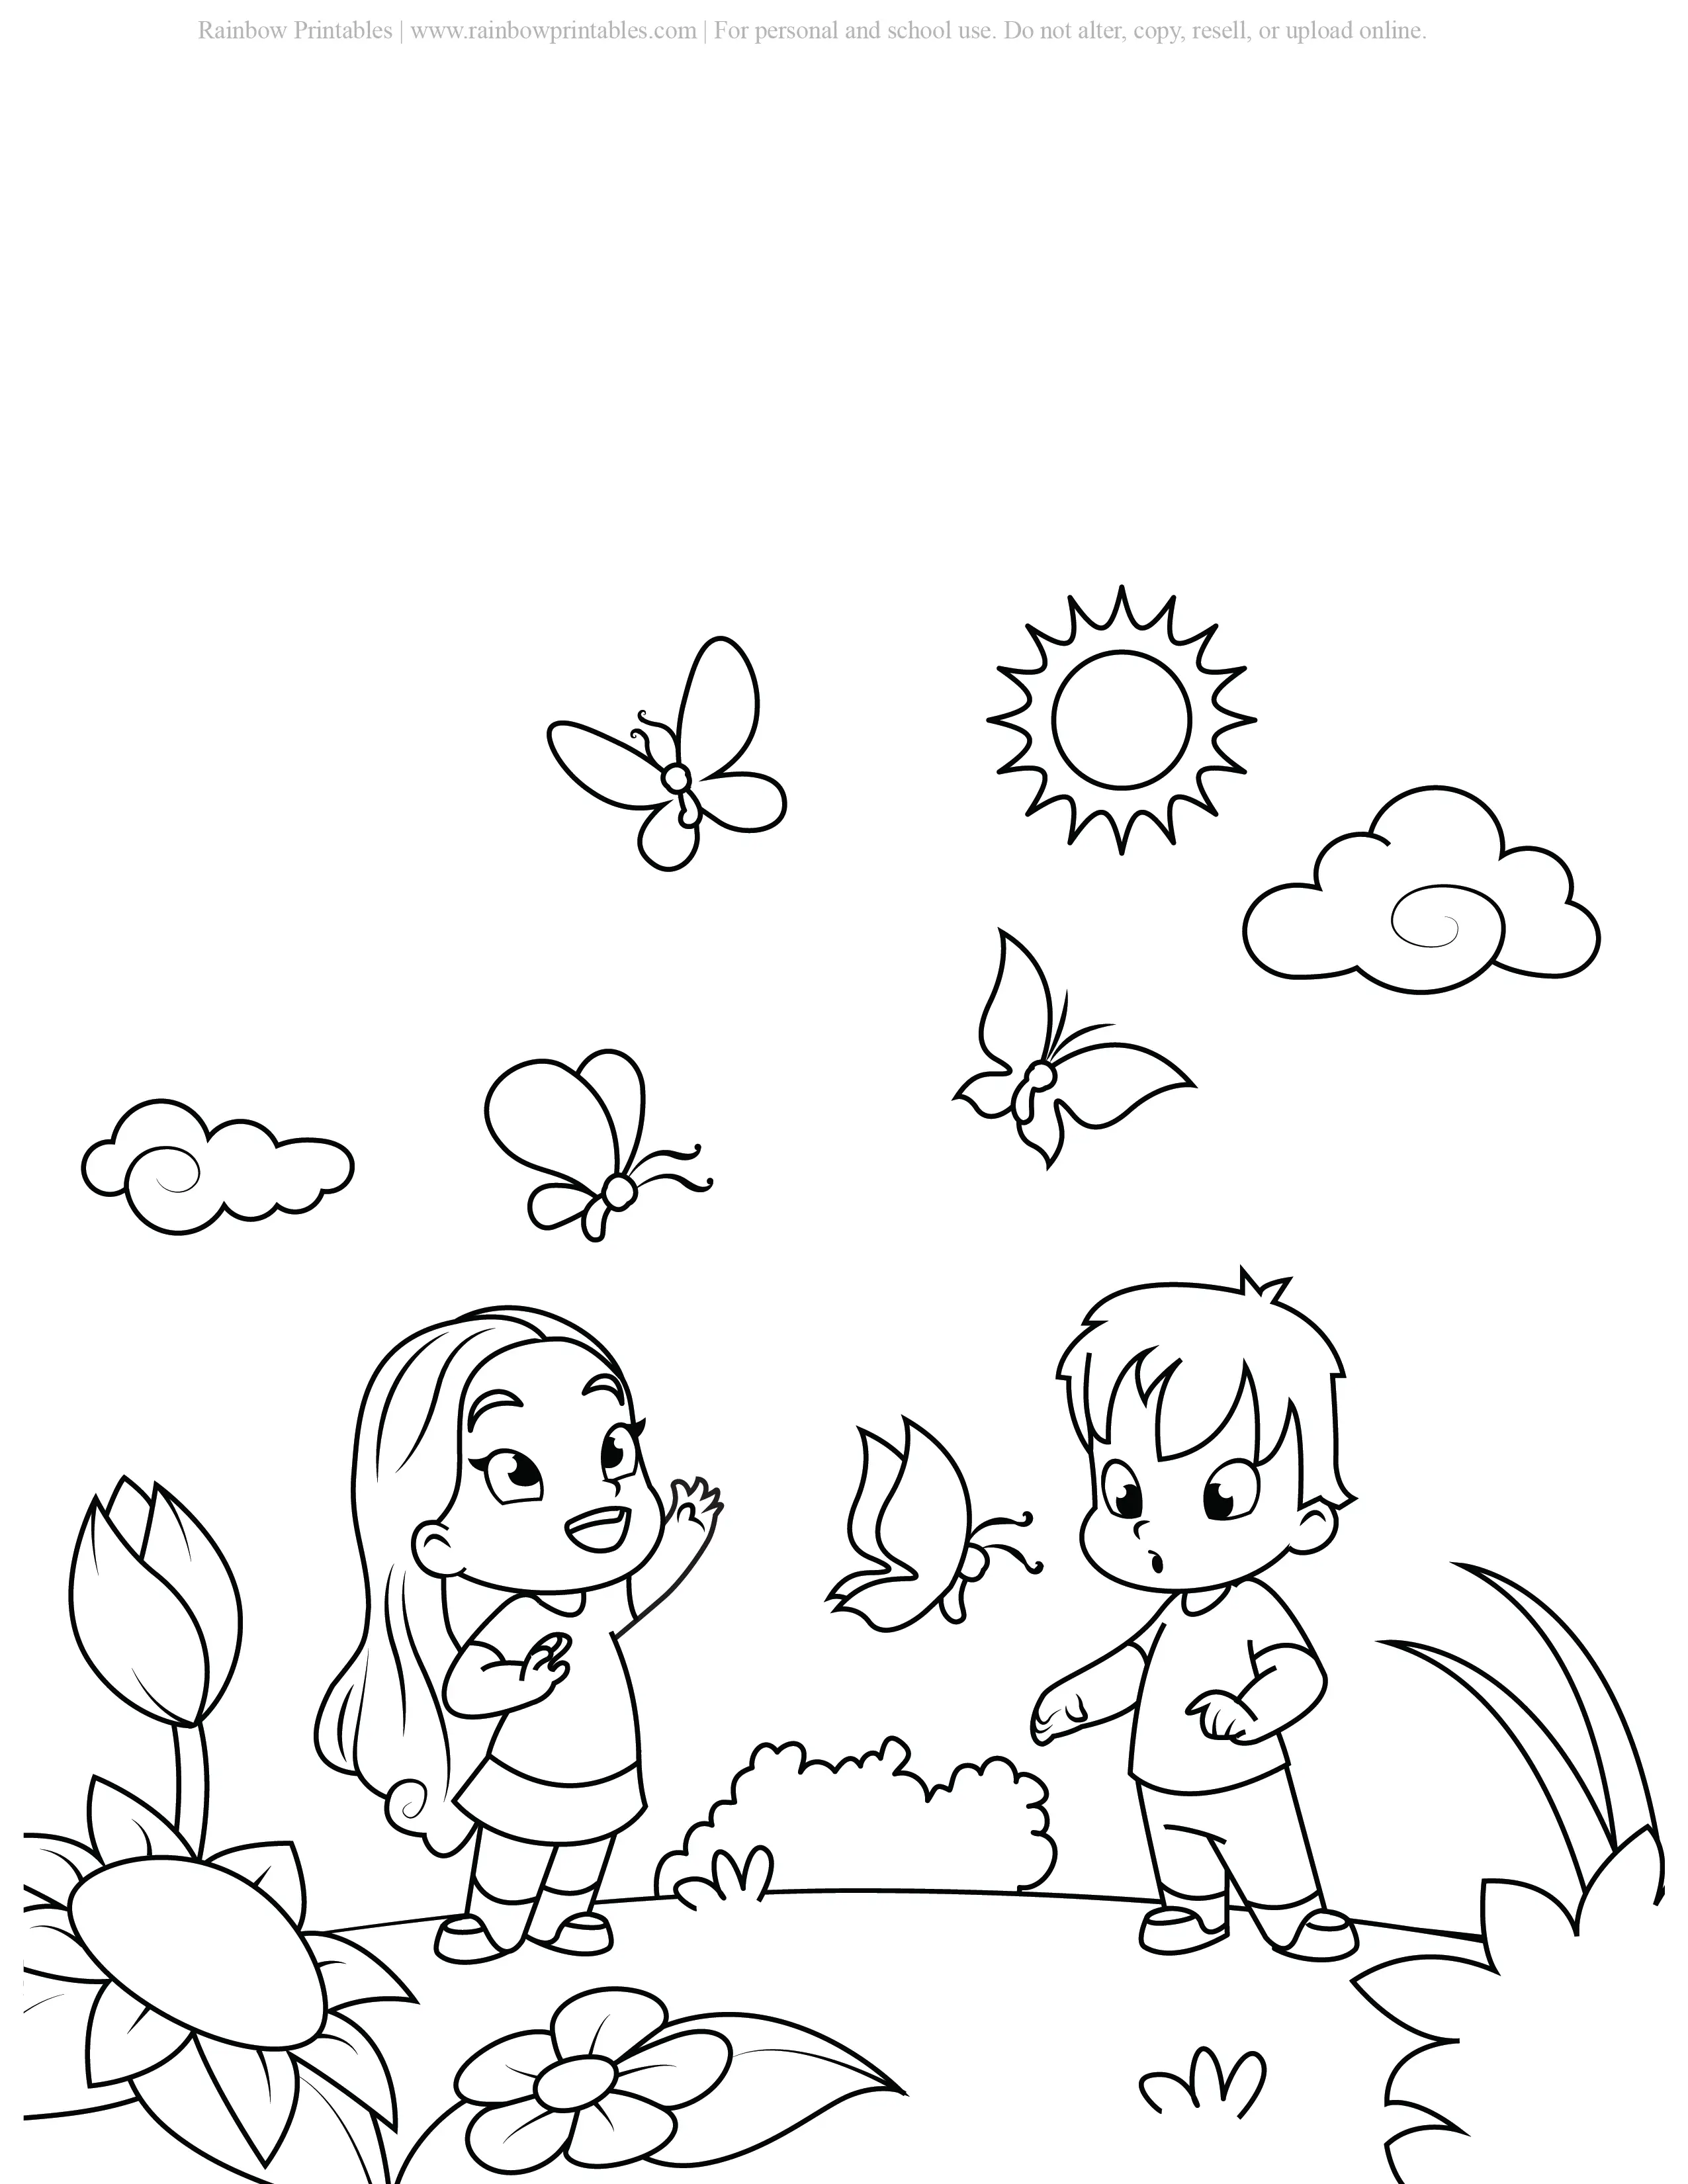 FREE SPRING TIME SEASON COLORING PAGES NATURE BEAUTIFUL PRINTABLE SHEETS FOR KIDS ART ACTIVITY